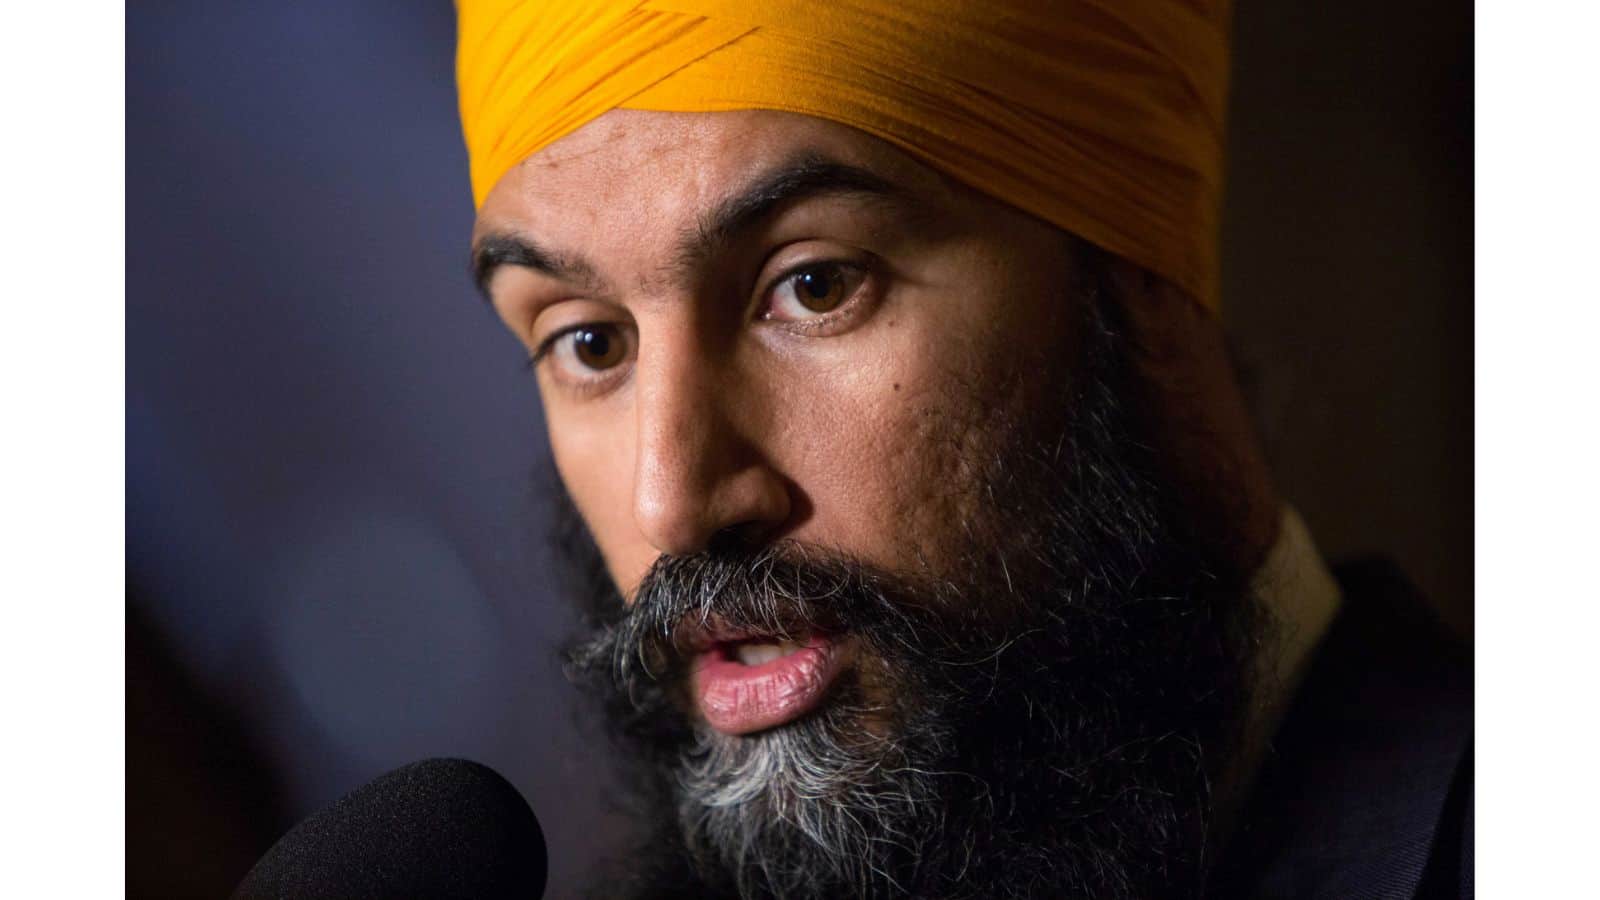 Singh Outlines NDP's Vision for Rebuilding Canada